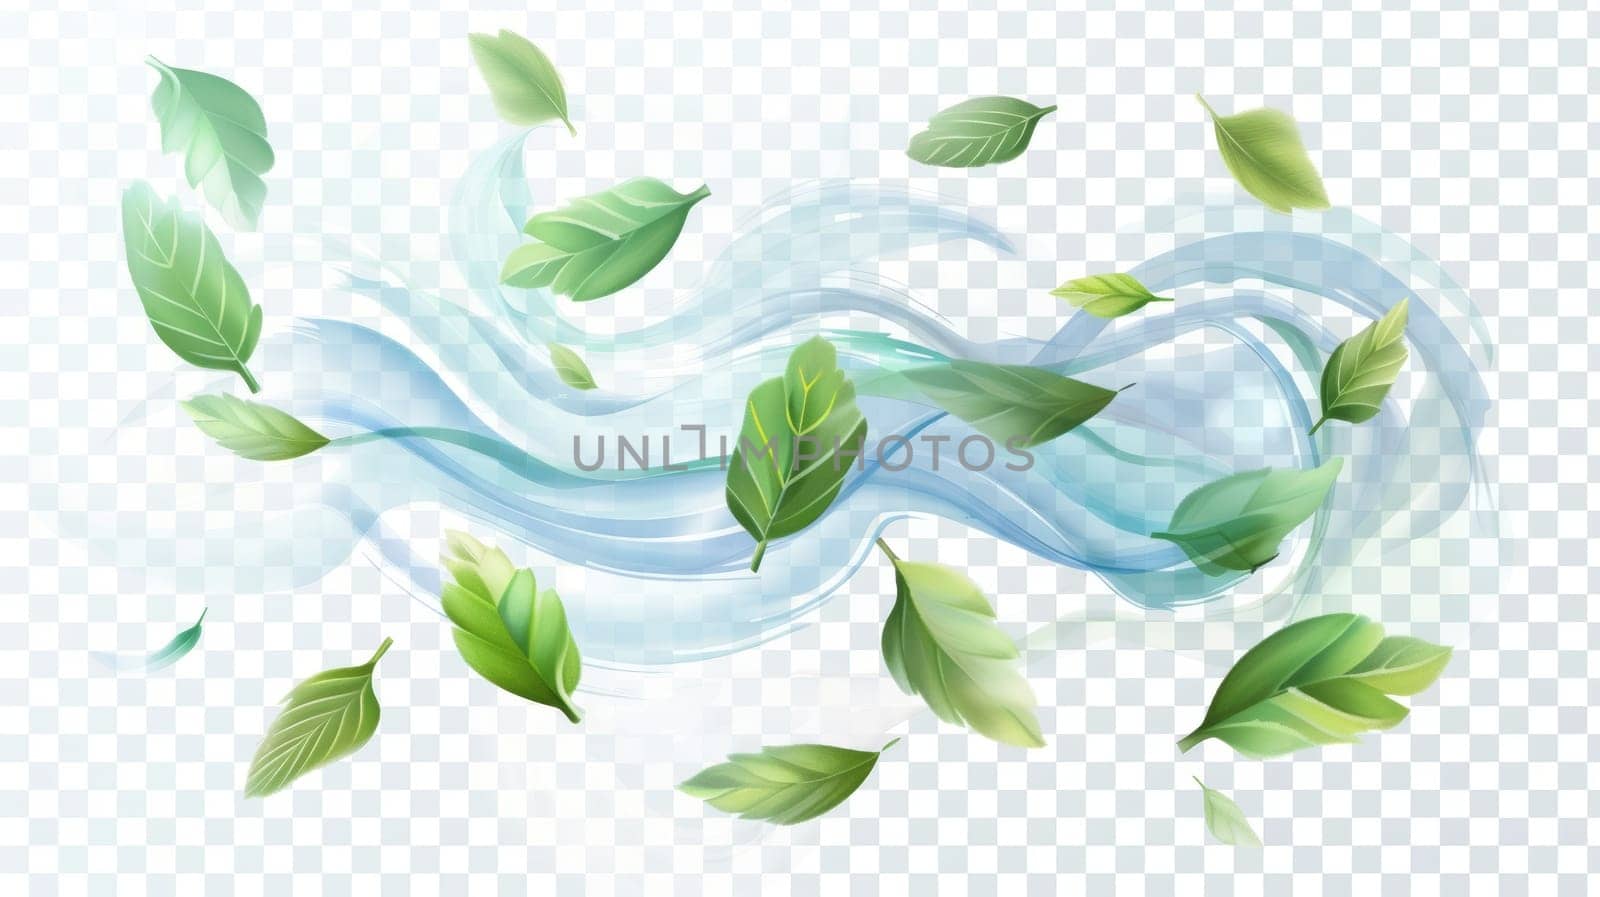 Flowing blue wind, air swirls, and waves with flying green leaves. Isolated fresh wind motion with mint leaves, modern illustration. by Andrei_01